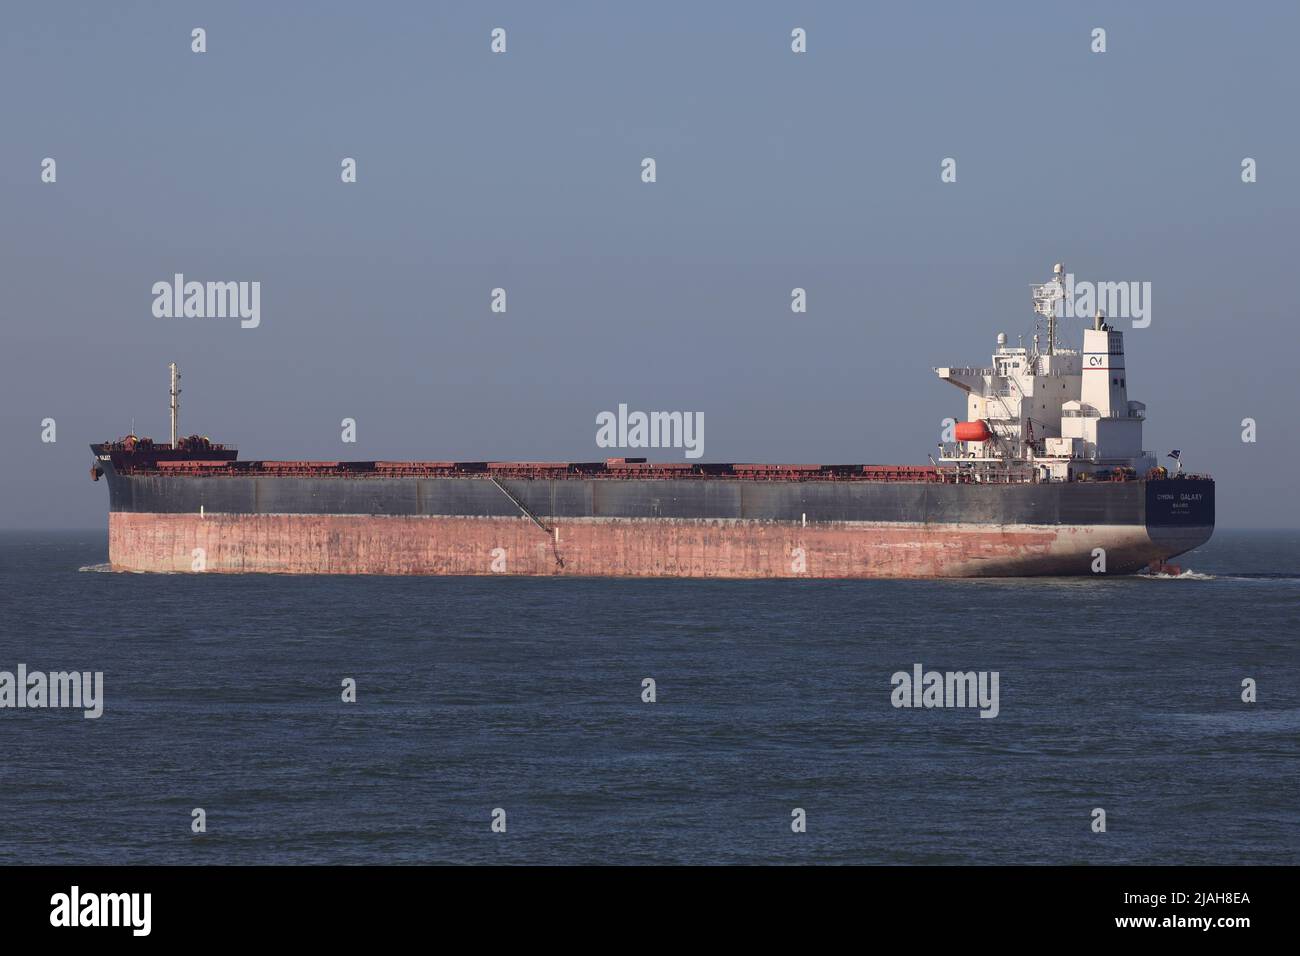 The bulk carrier Cymona Galaxy leaves the port of Rotterdam on March 18, 2022. Stock Photo